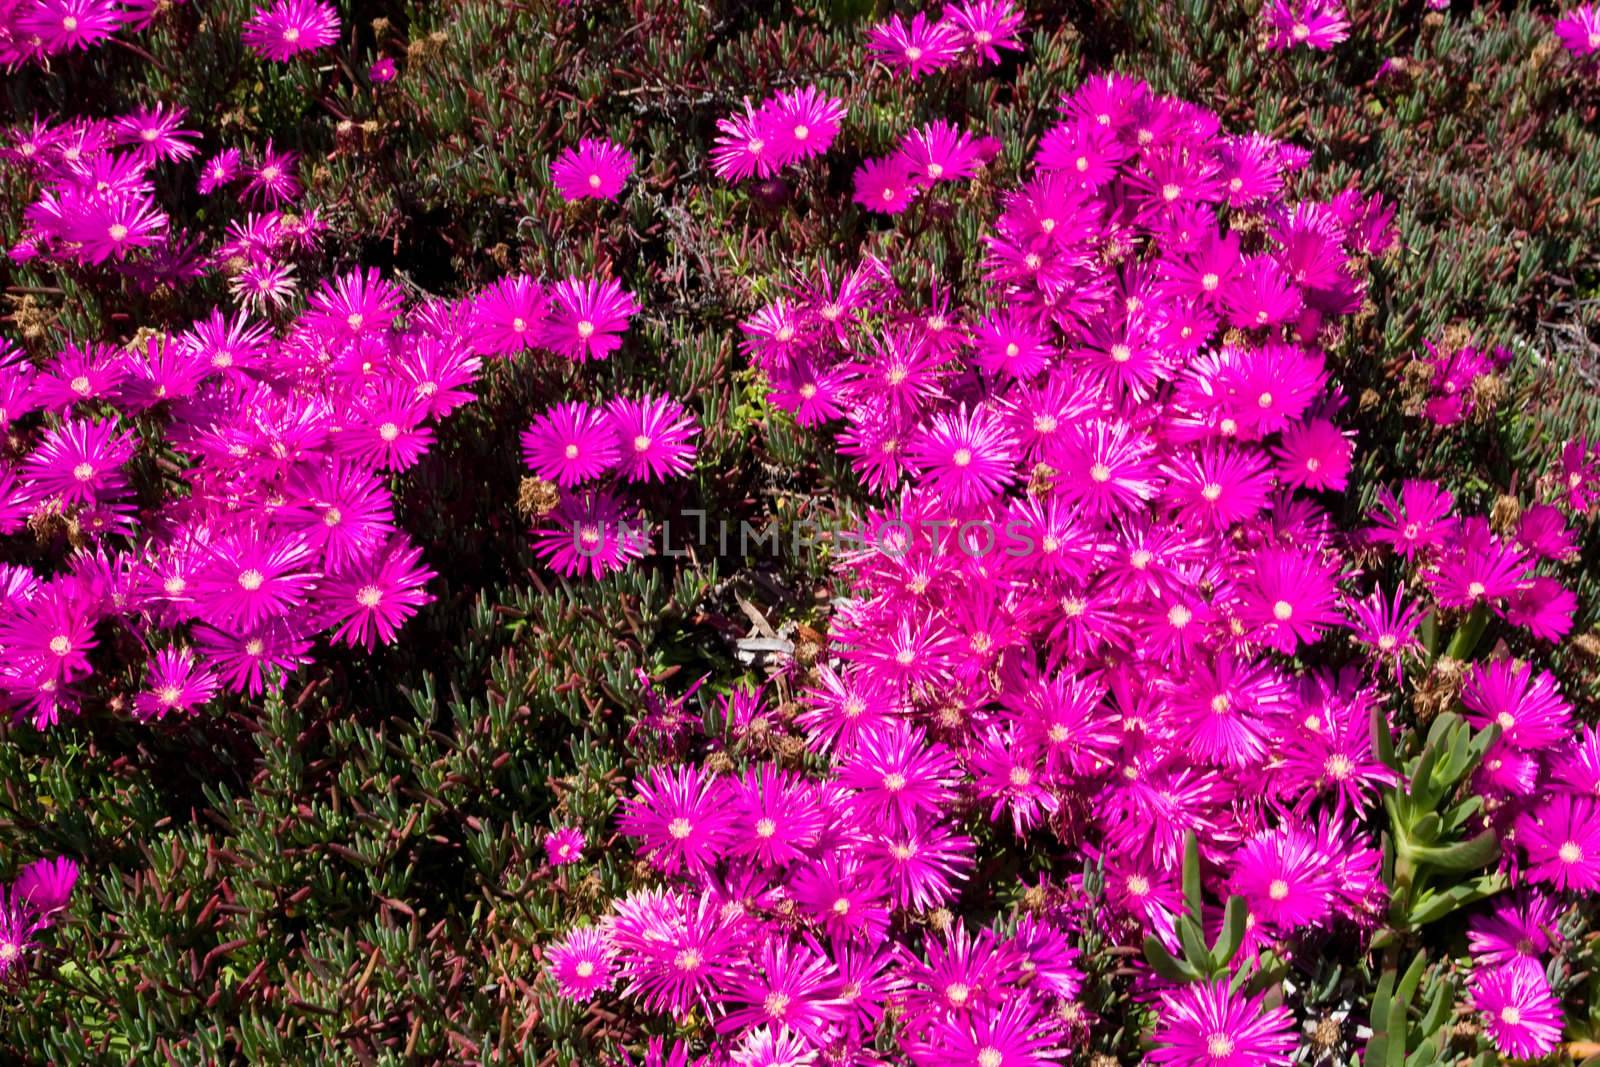 Carpobrotus edulis is a creeping, mat-forming succulent species and member of the Stone Plant family Aizoaceae, one of about 30 species in the genus Carpobrotus. It is also known as Ice Plant, Highway Ice Plant, Pigface or Hottentot Fig and in South Africa as the Sour Fig, on account of its edible fruit. It was previously classified in genus Mesembryanthemum and is sometimes referred to by this name. The species is native to South Africa but is naturalised in many other regions throughout the world.